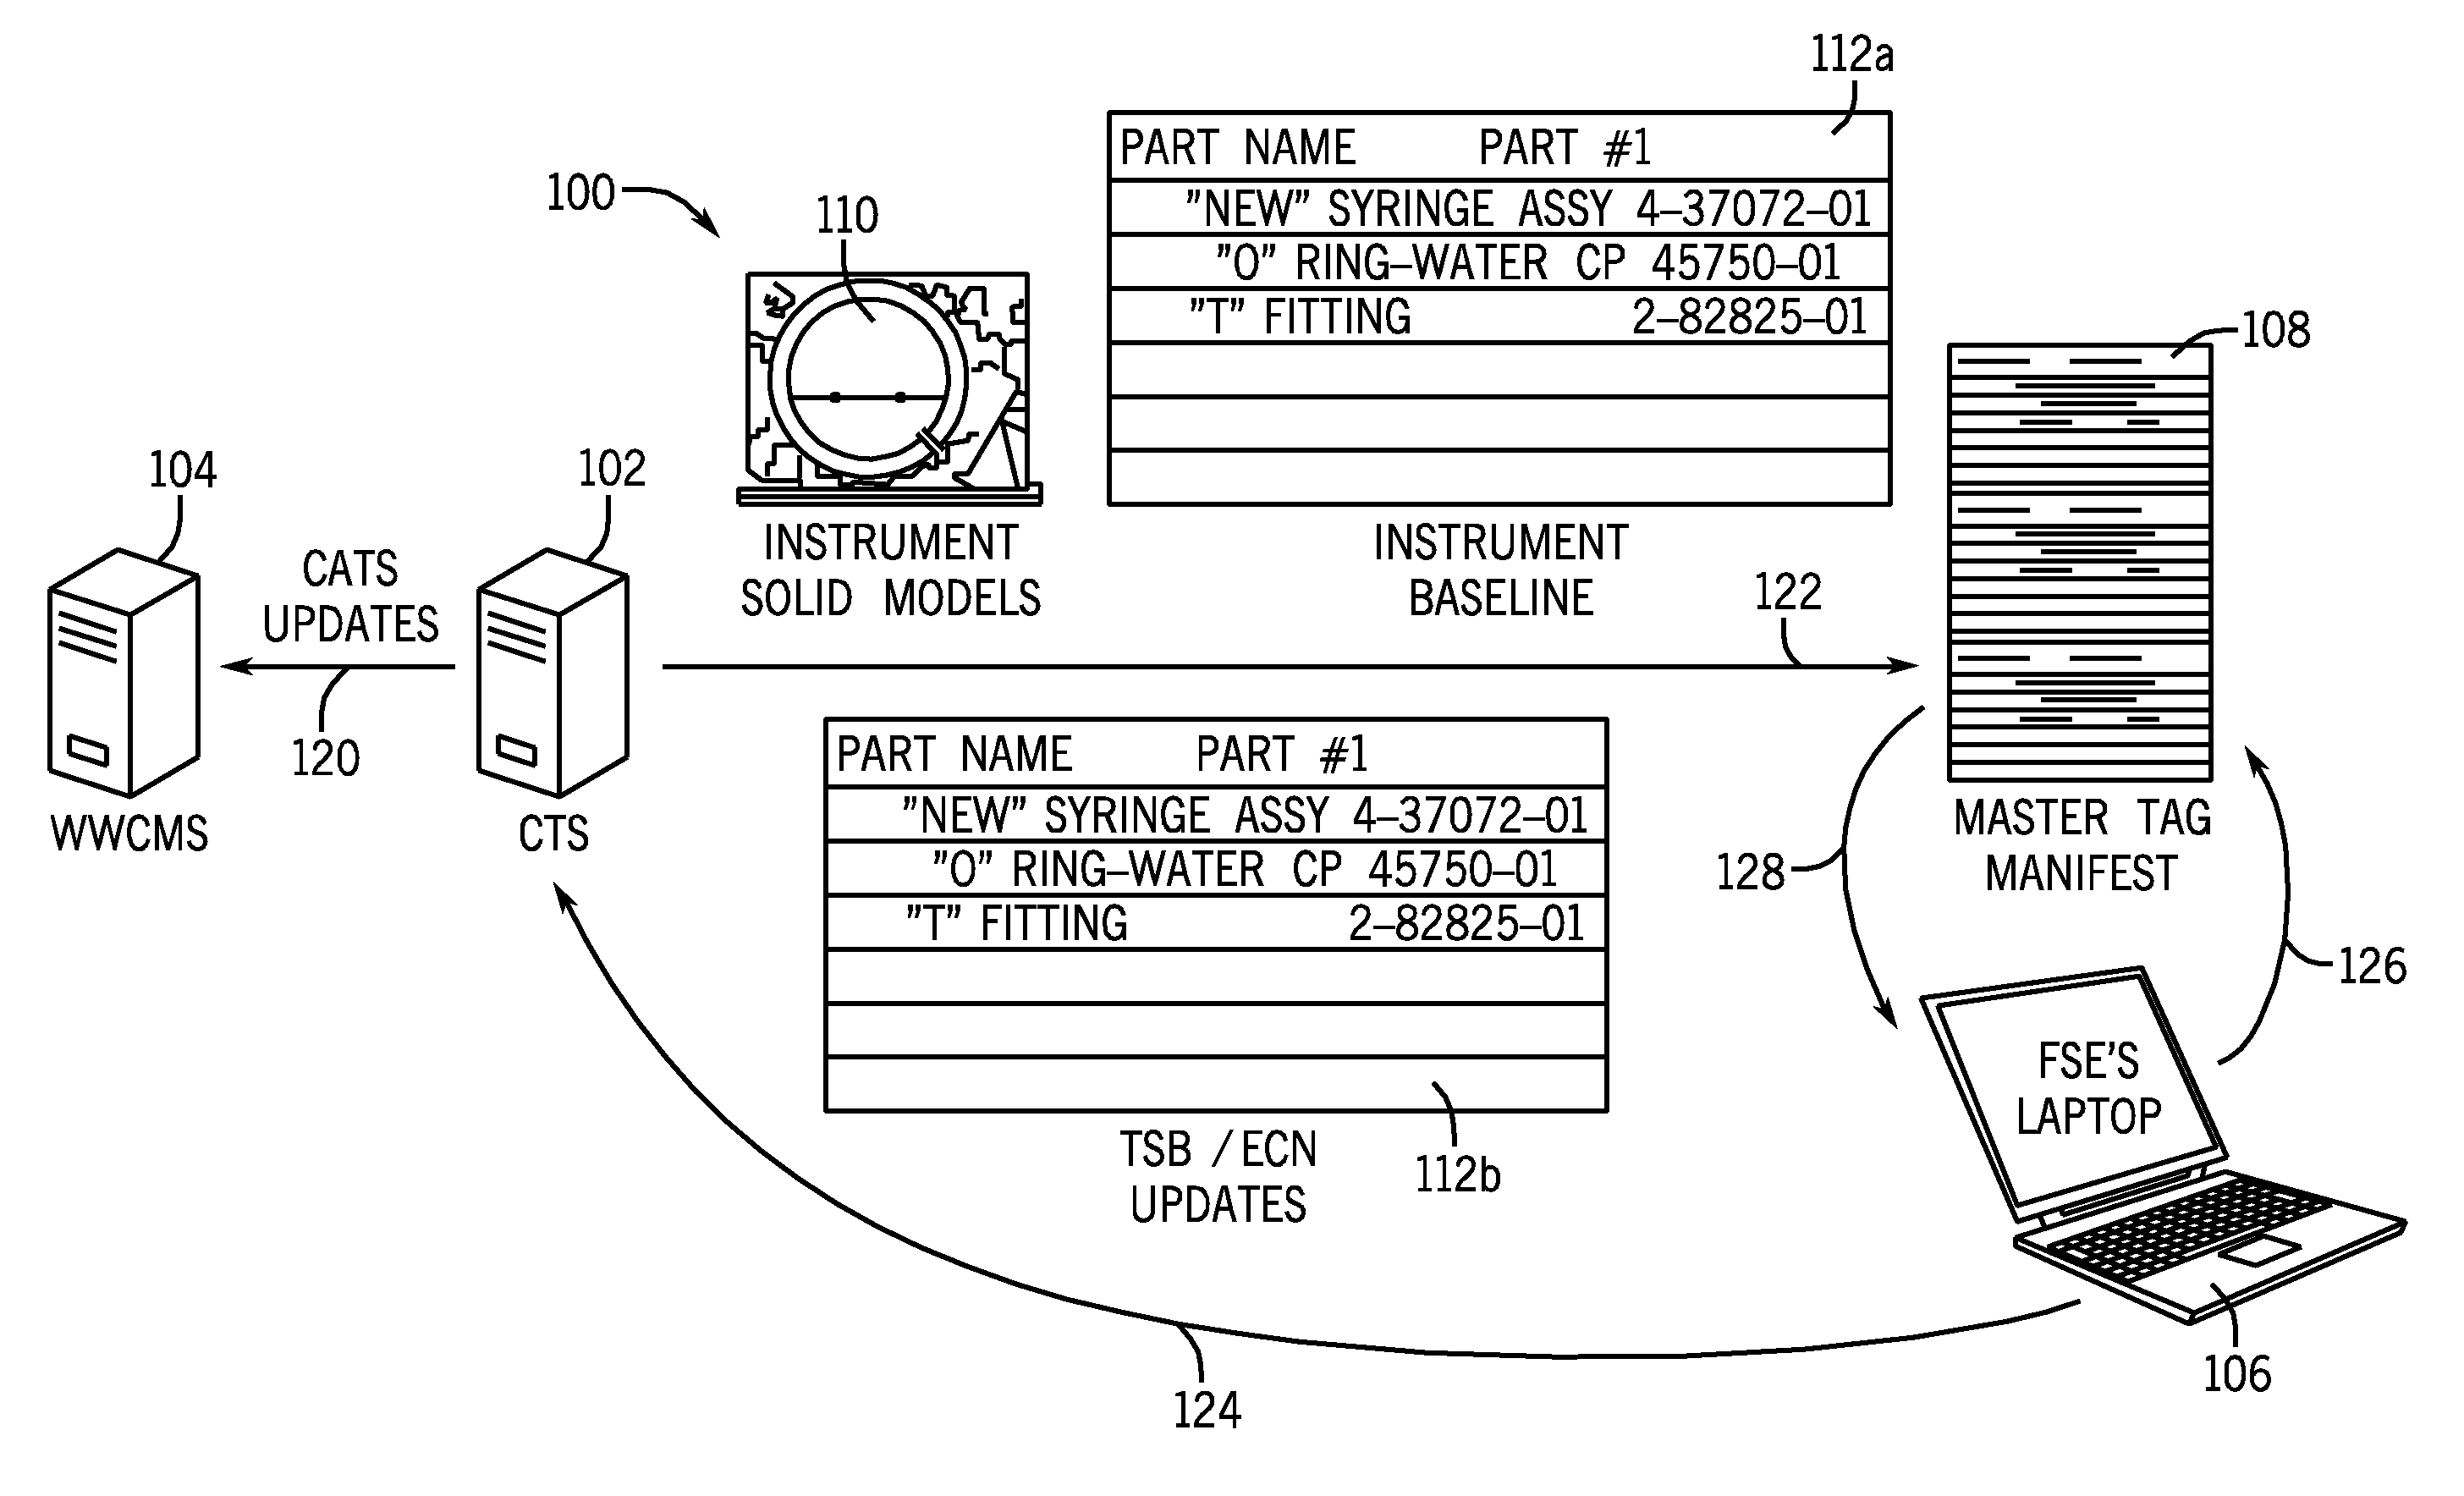 System for tracking the location of components, assemblies, and subassemblies in an automated diagnostic analyzer